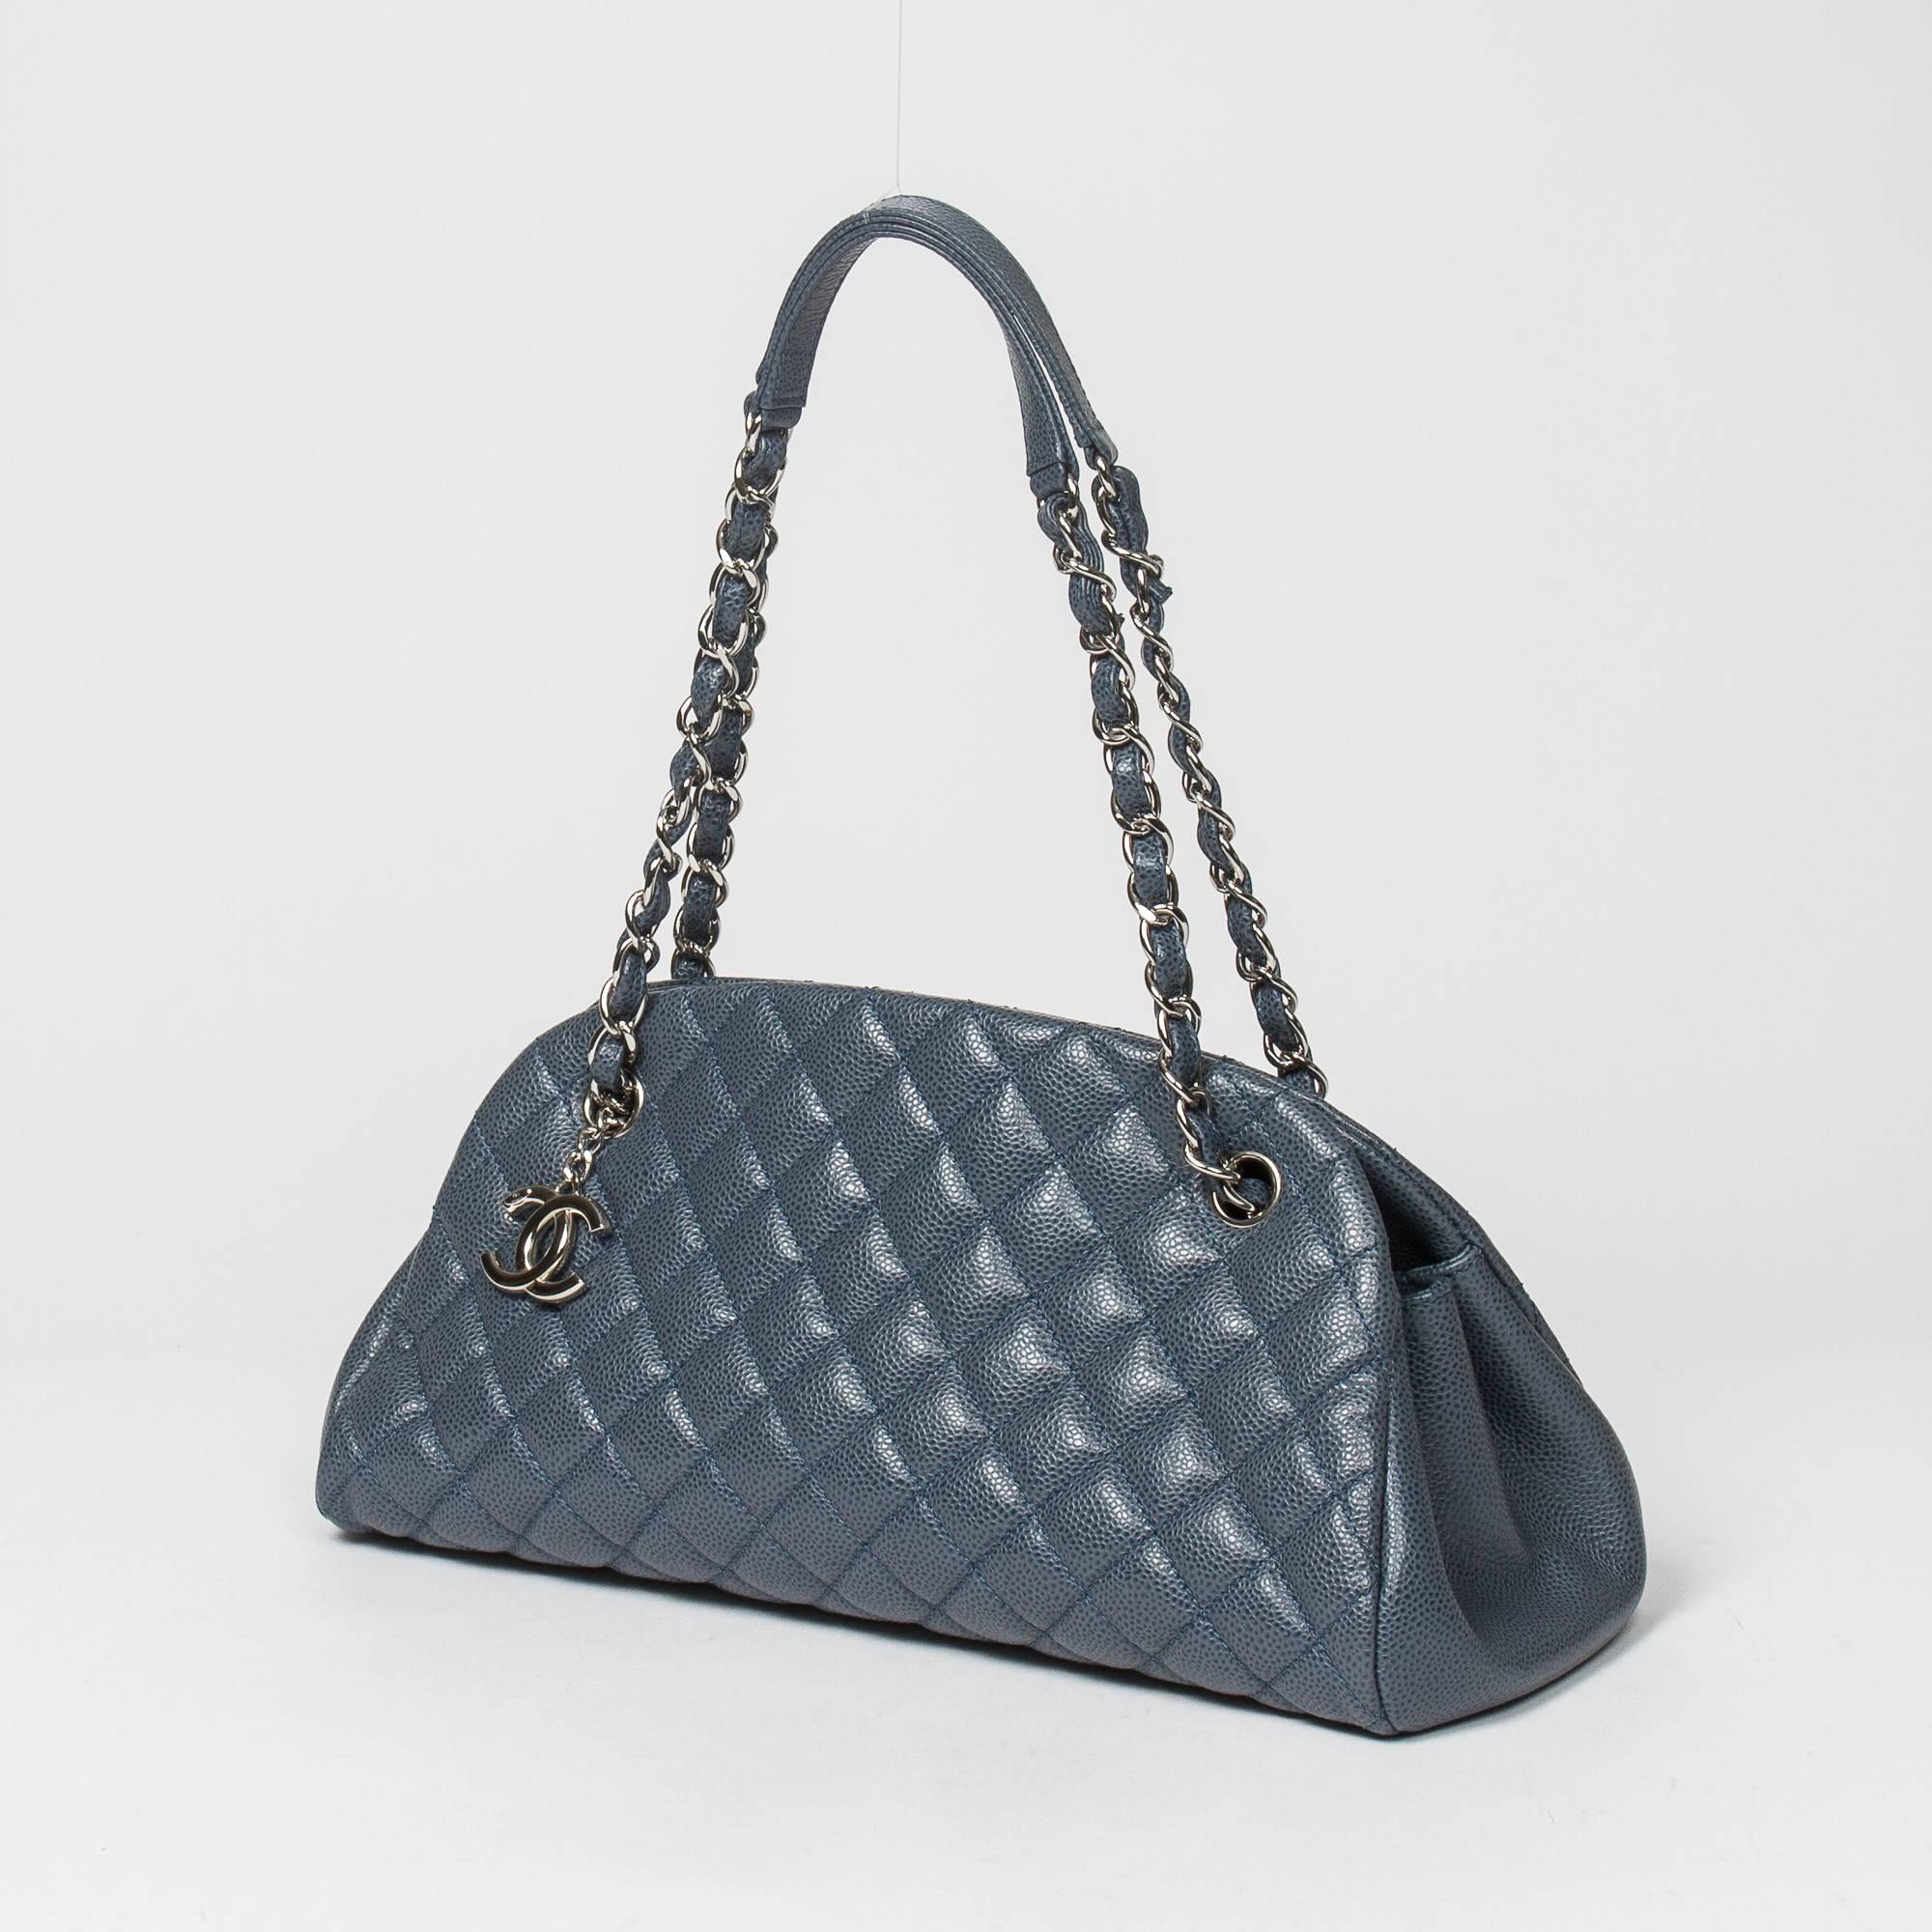 Handbag in light blue caviar quilted calf leather, double chain strap interlaced with leather, CC in front, silver tone hardware.  Blue sky lined interior with 1 zip pocket, 3 compartments. Silver tone heat stamp 